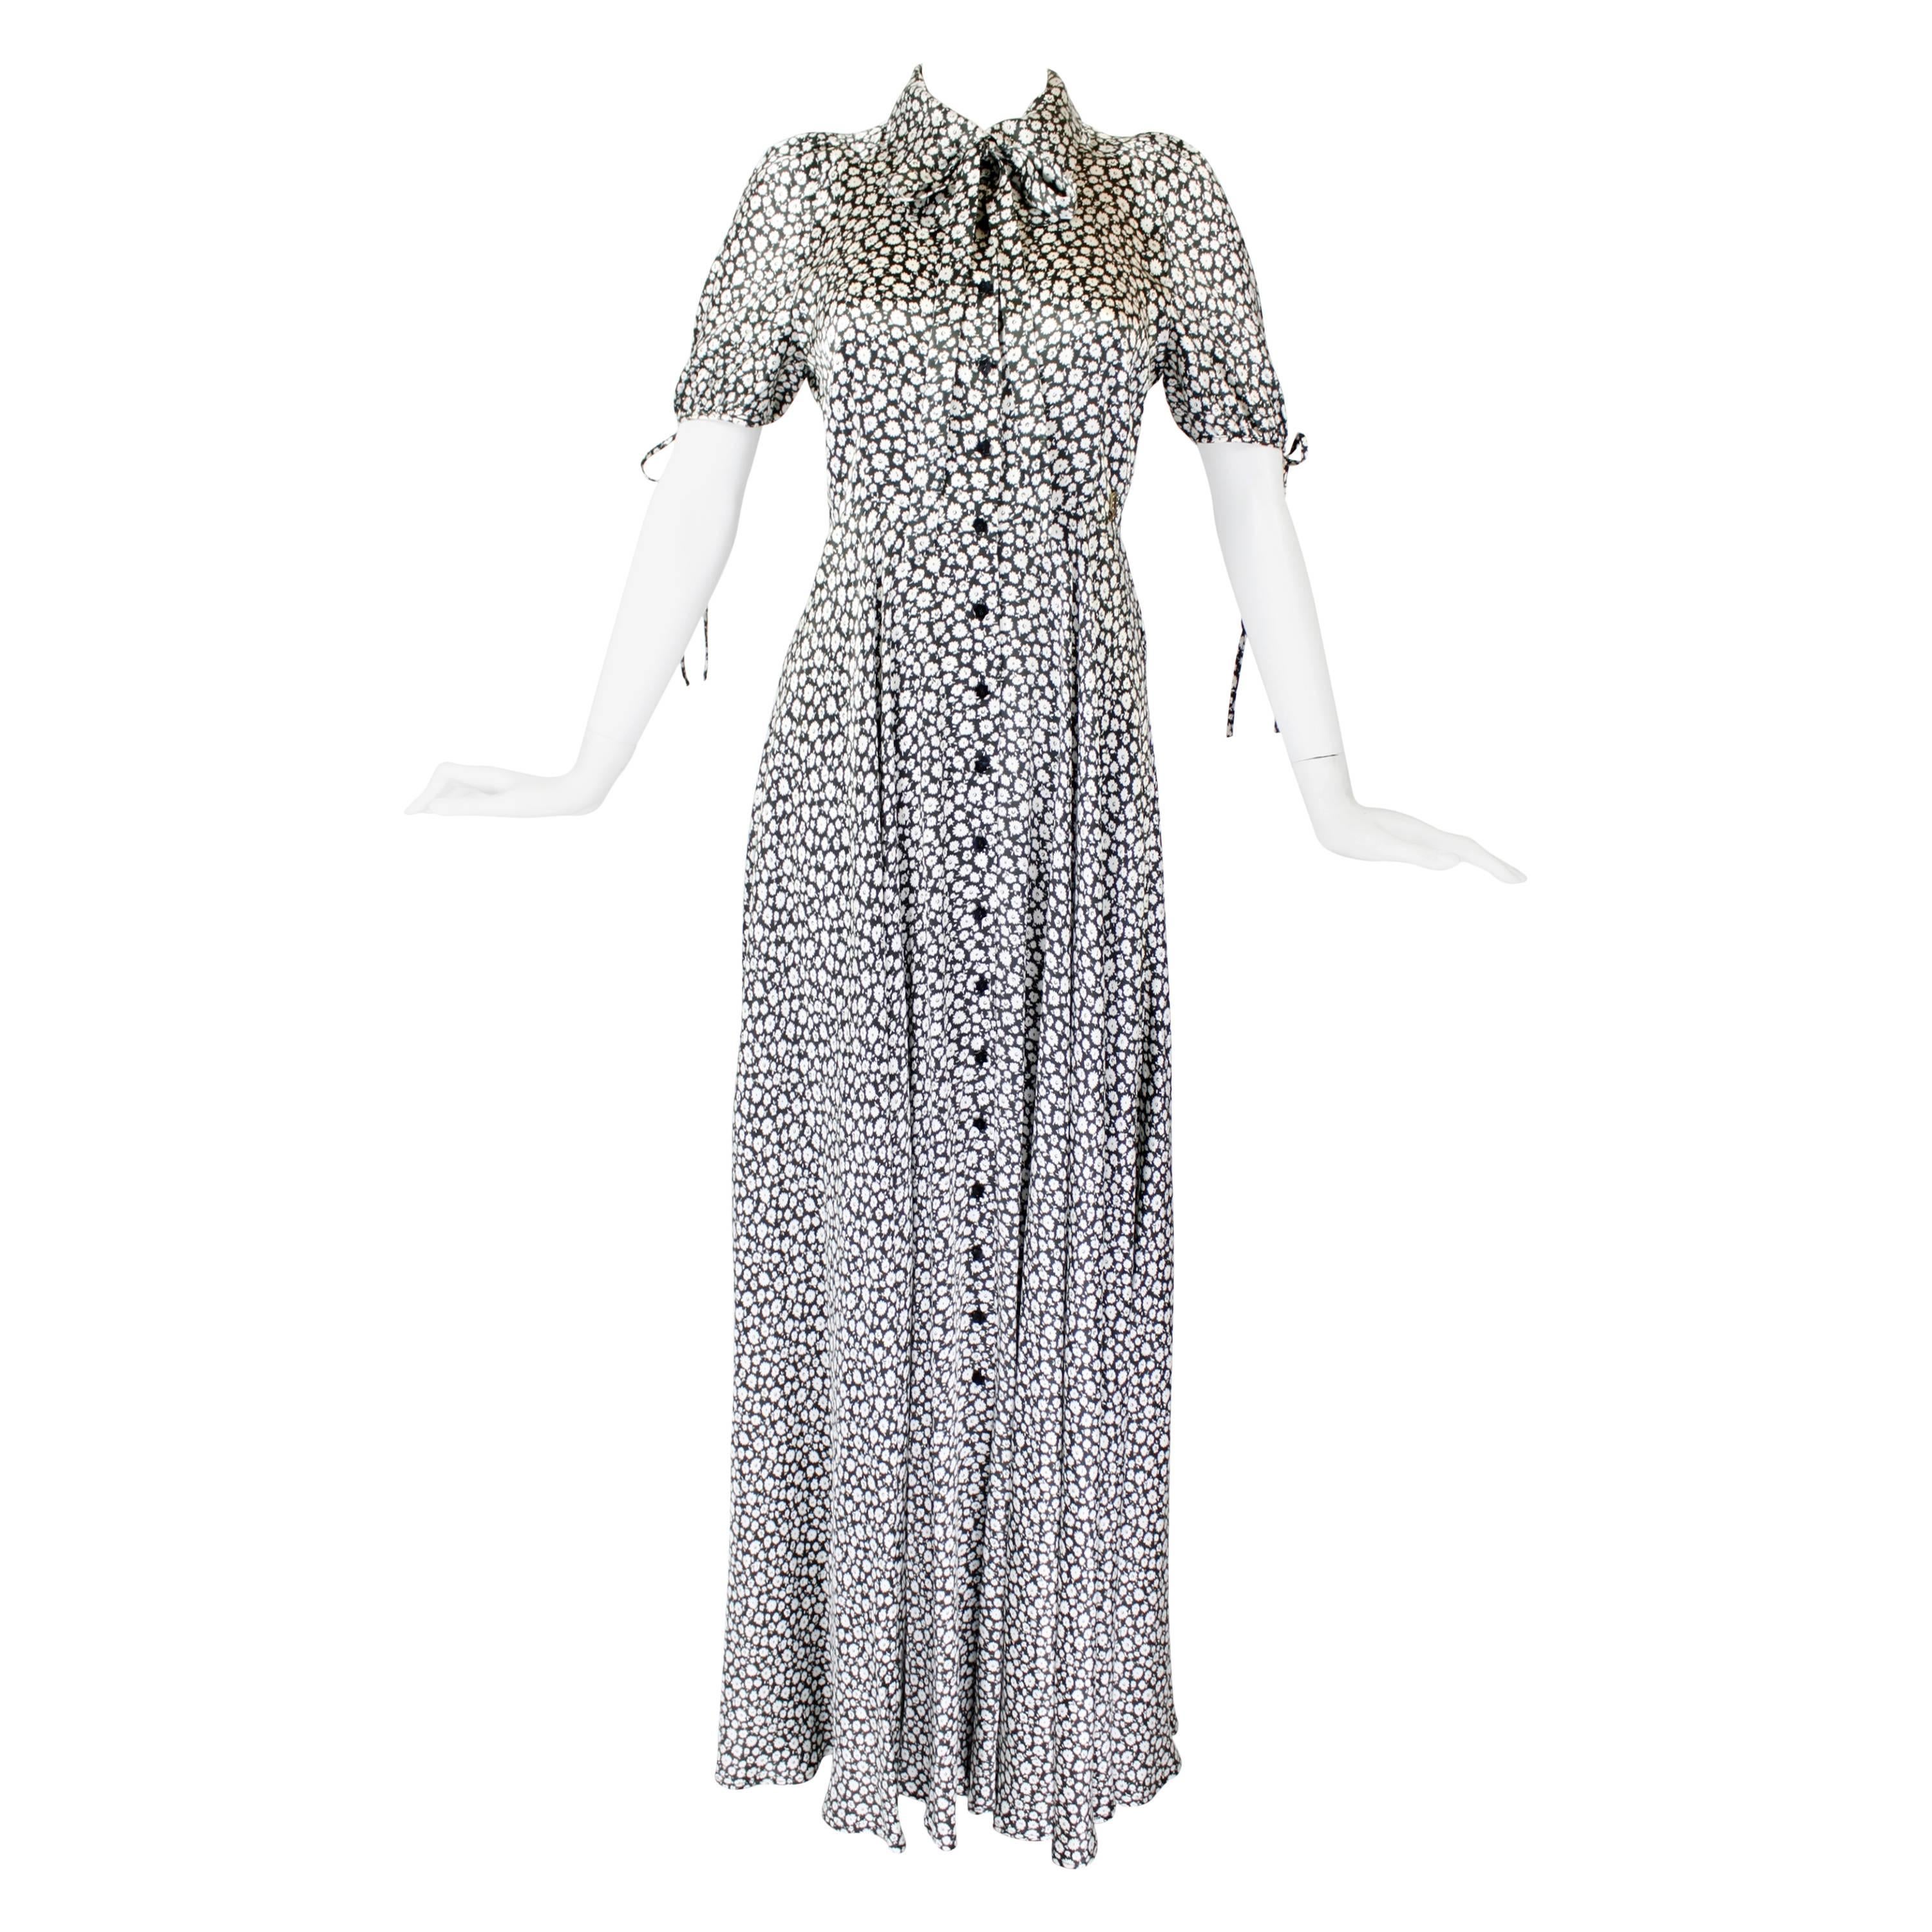 Galliano 1930s Style Floral Dress with Star Button-Front and Neck Bow